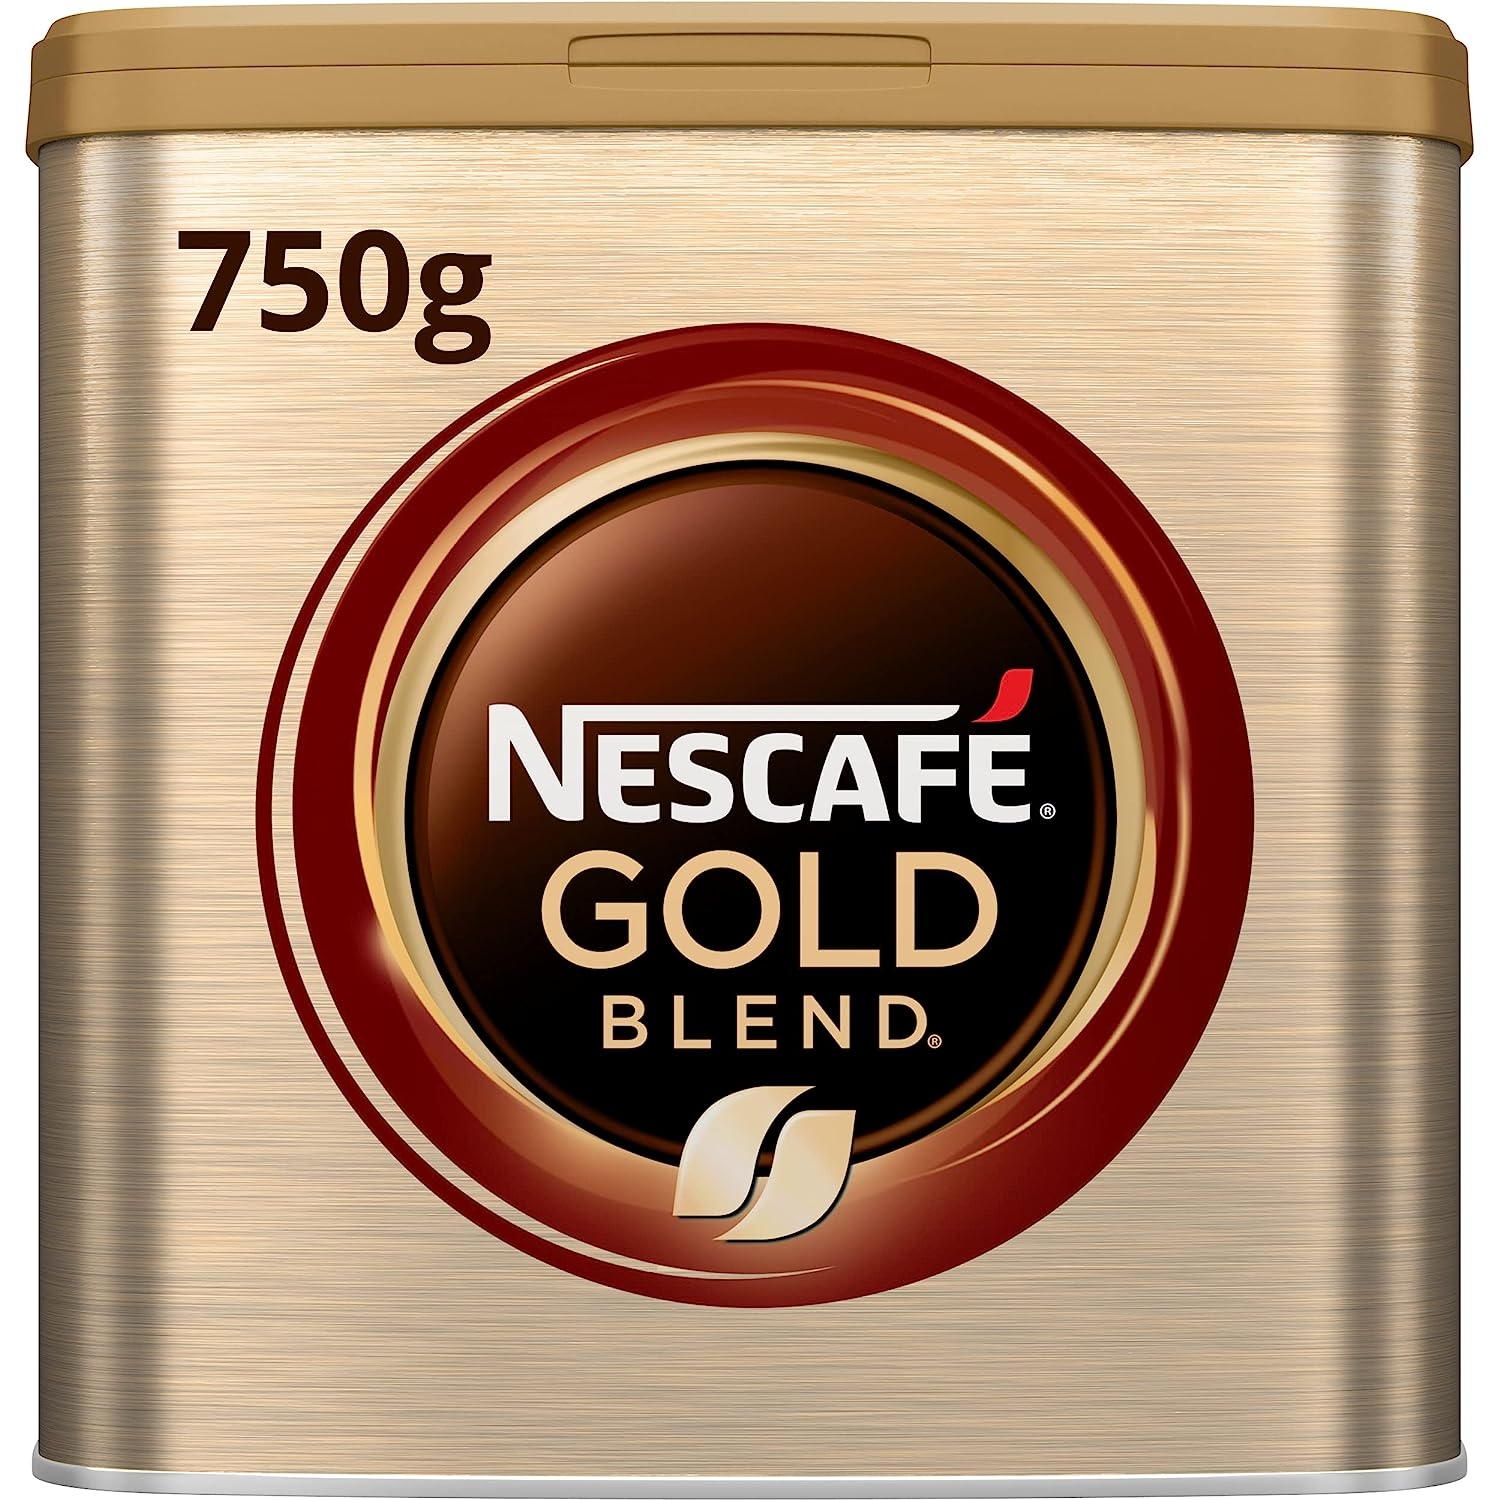 Nescafe Gold Blend Coffee – 750g   price checker   price checker Description Gallery Reviews Variations Additional details